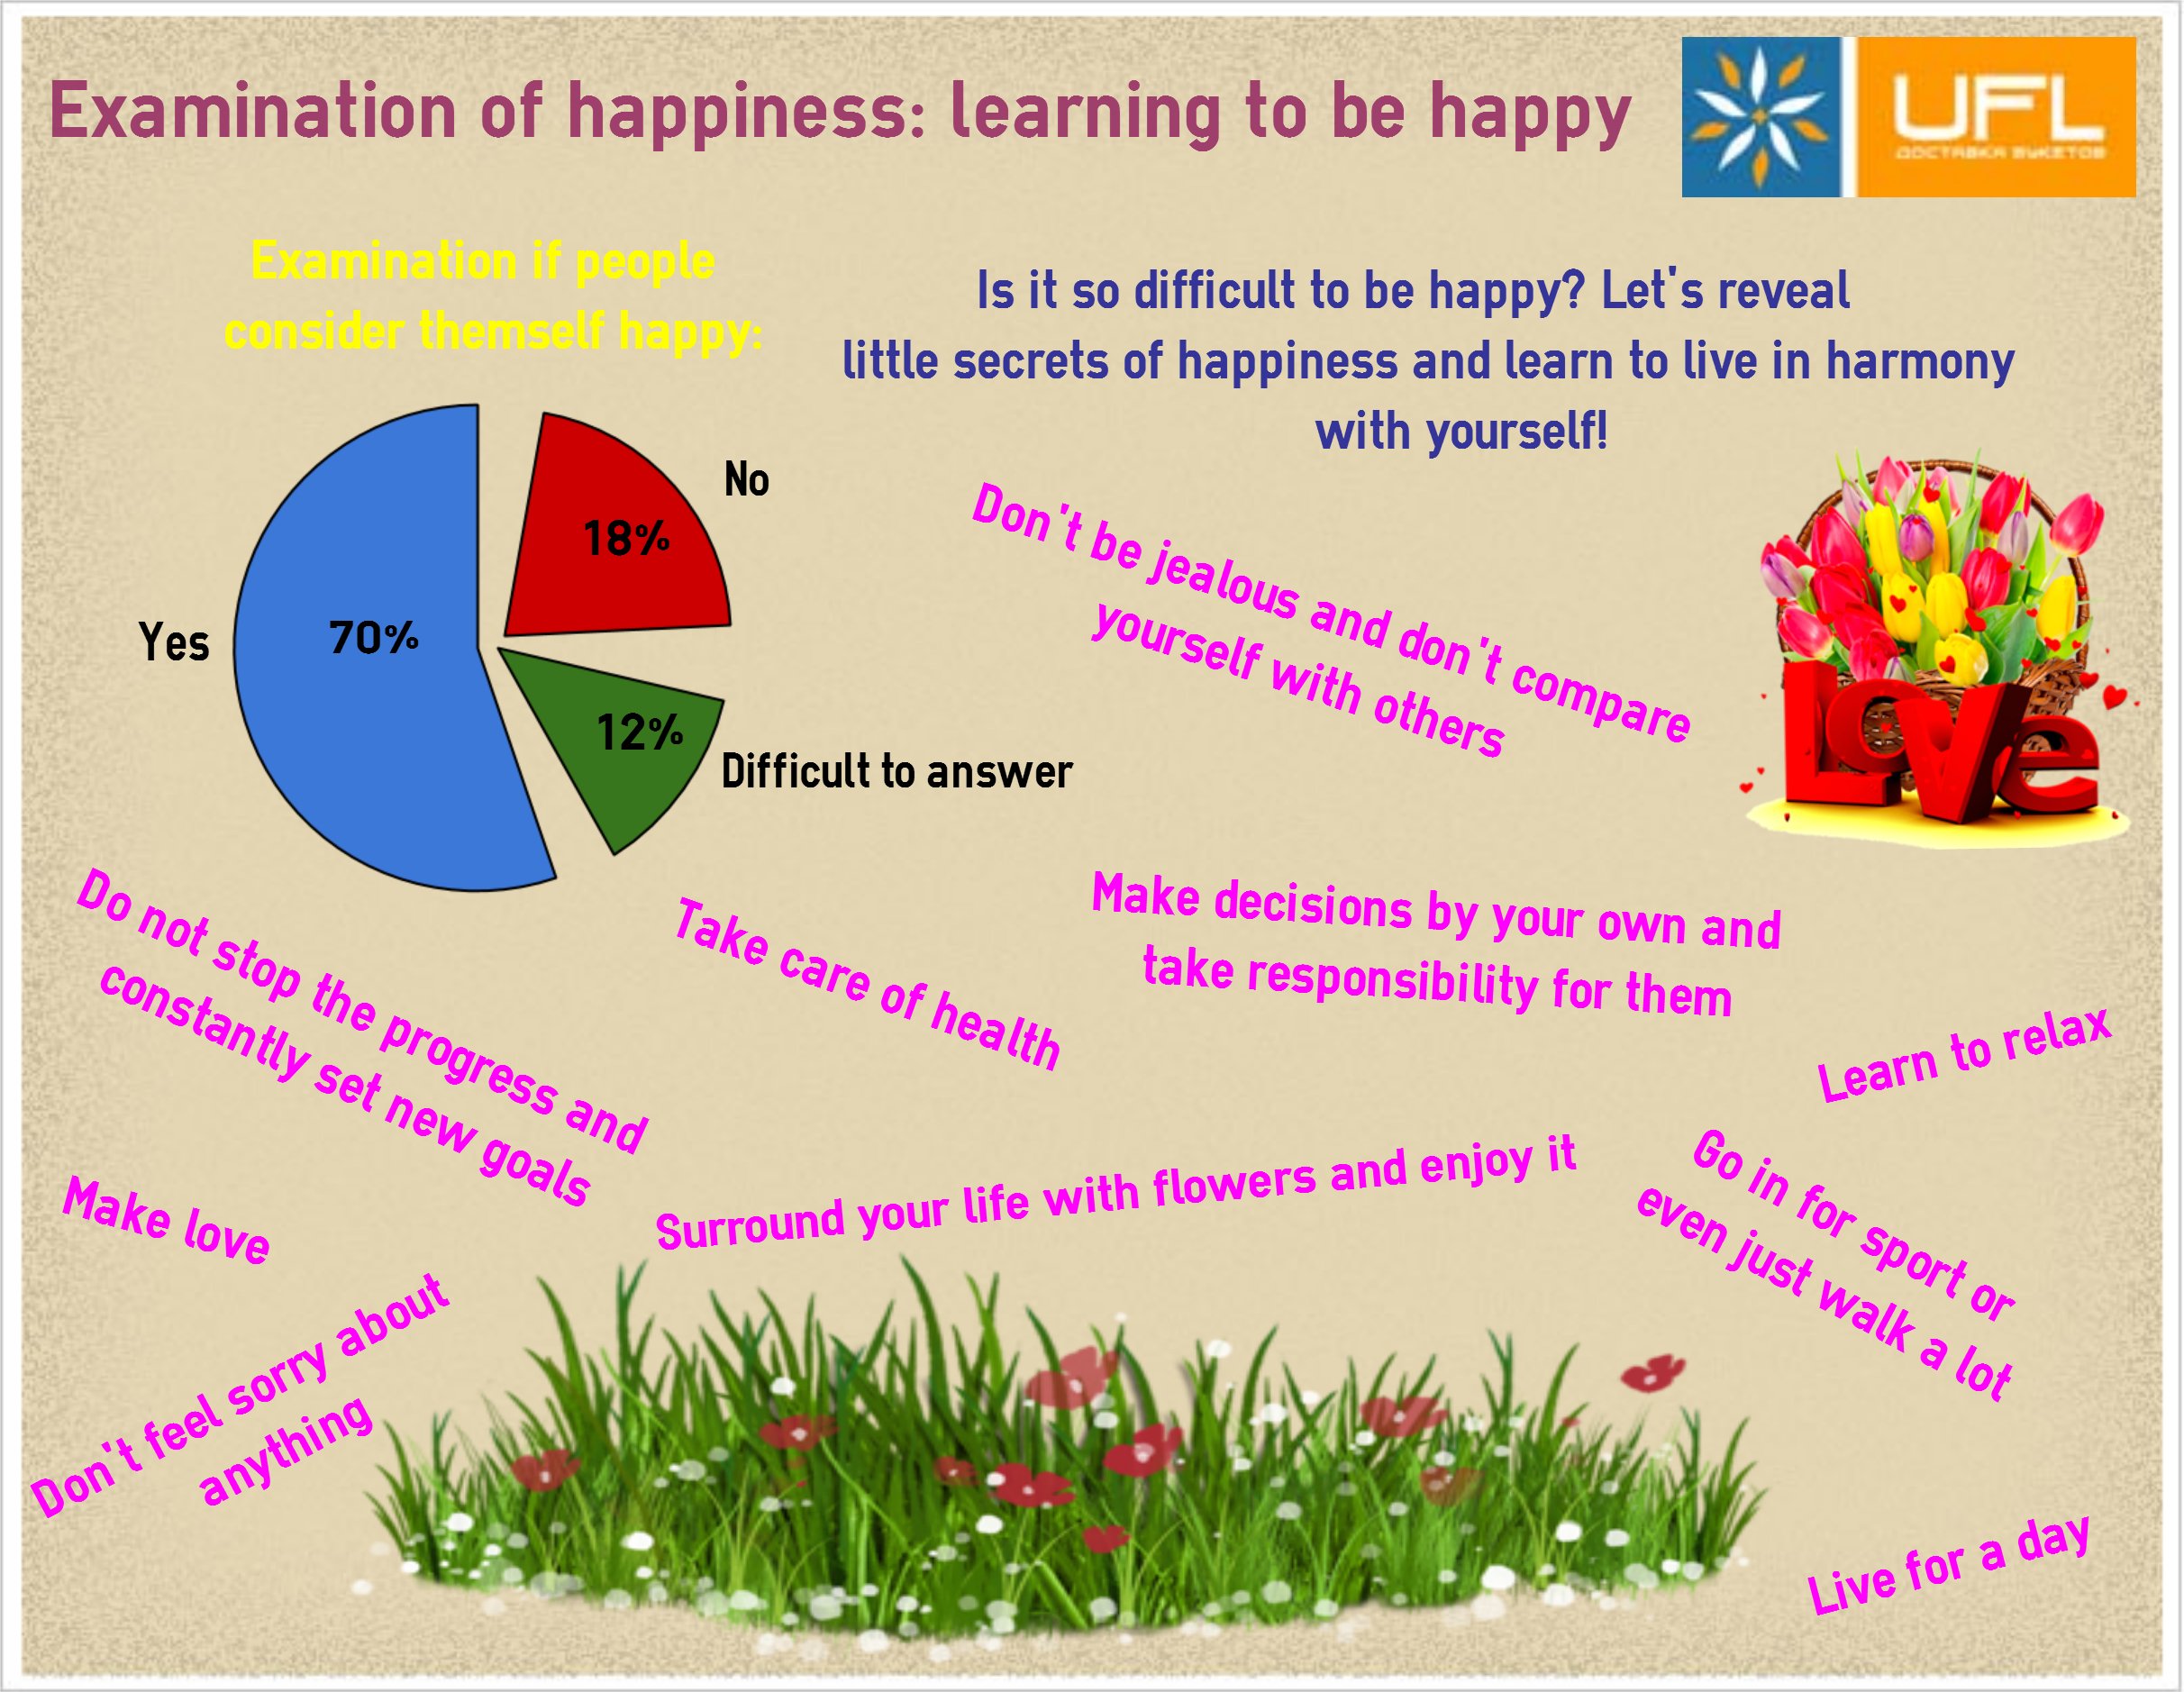 Examination of happiness: few steps to become a happy person